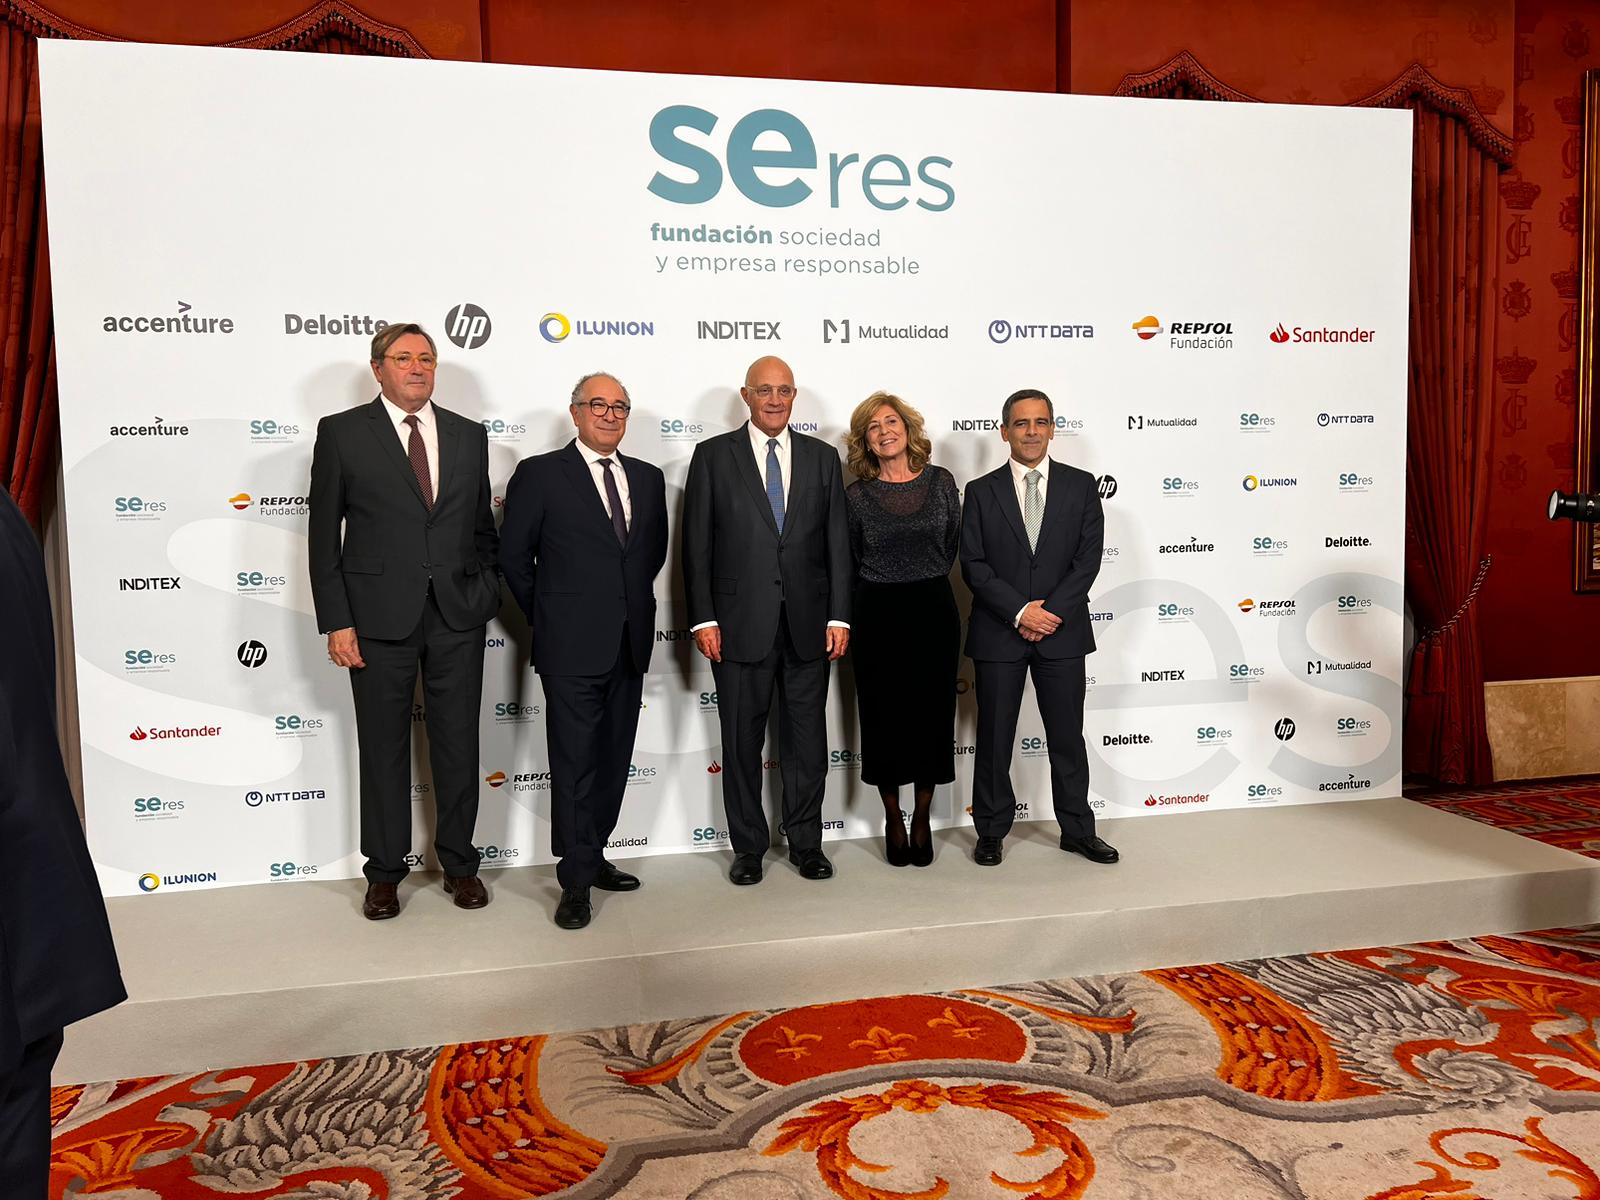 Sogeviso wins SERES Awards for its commitment to social innovation